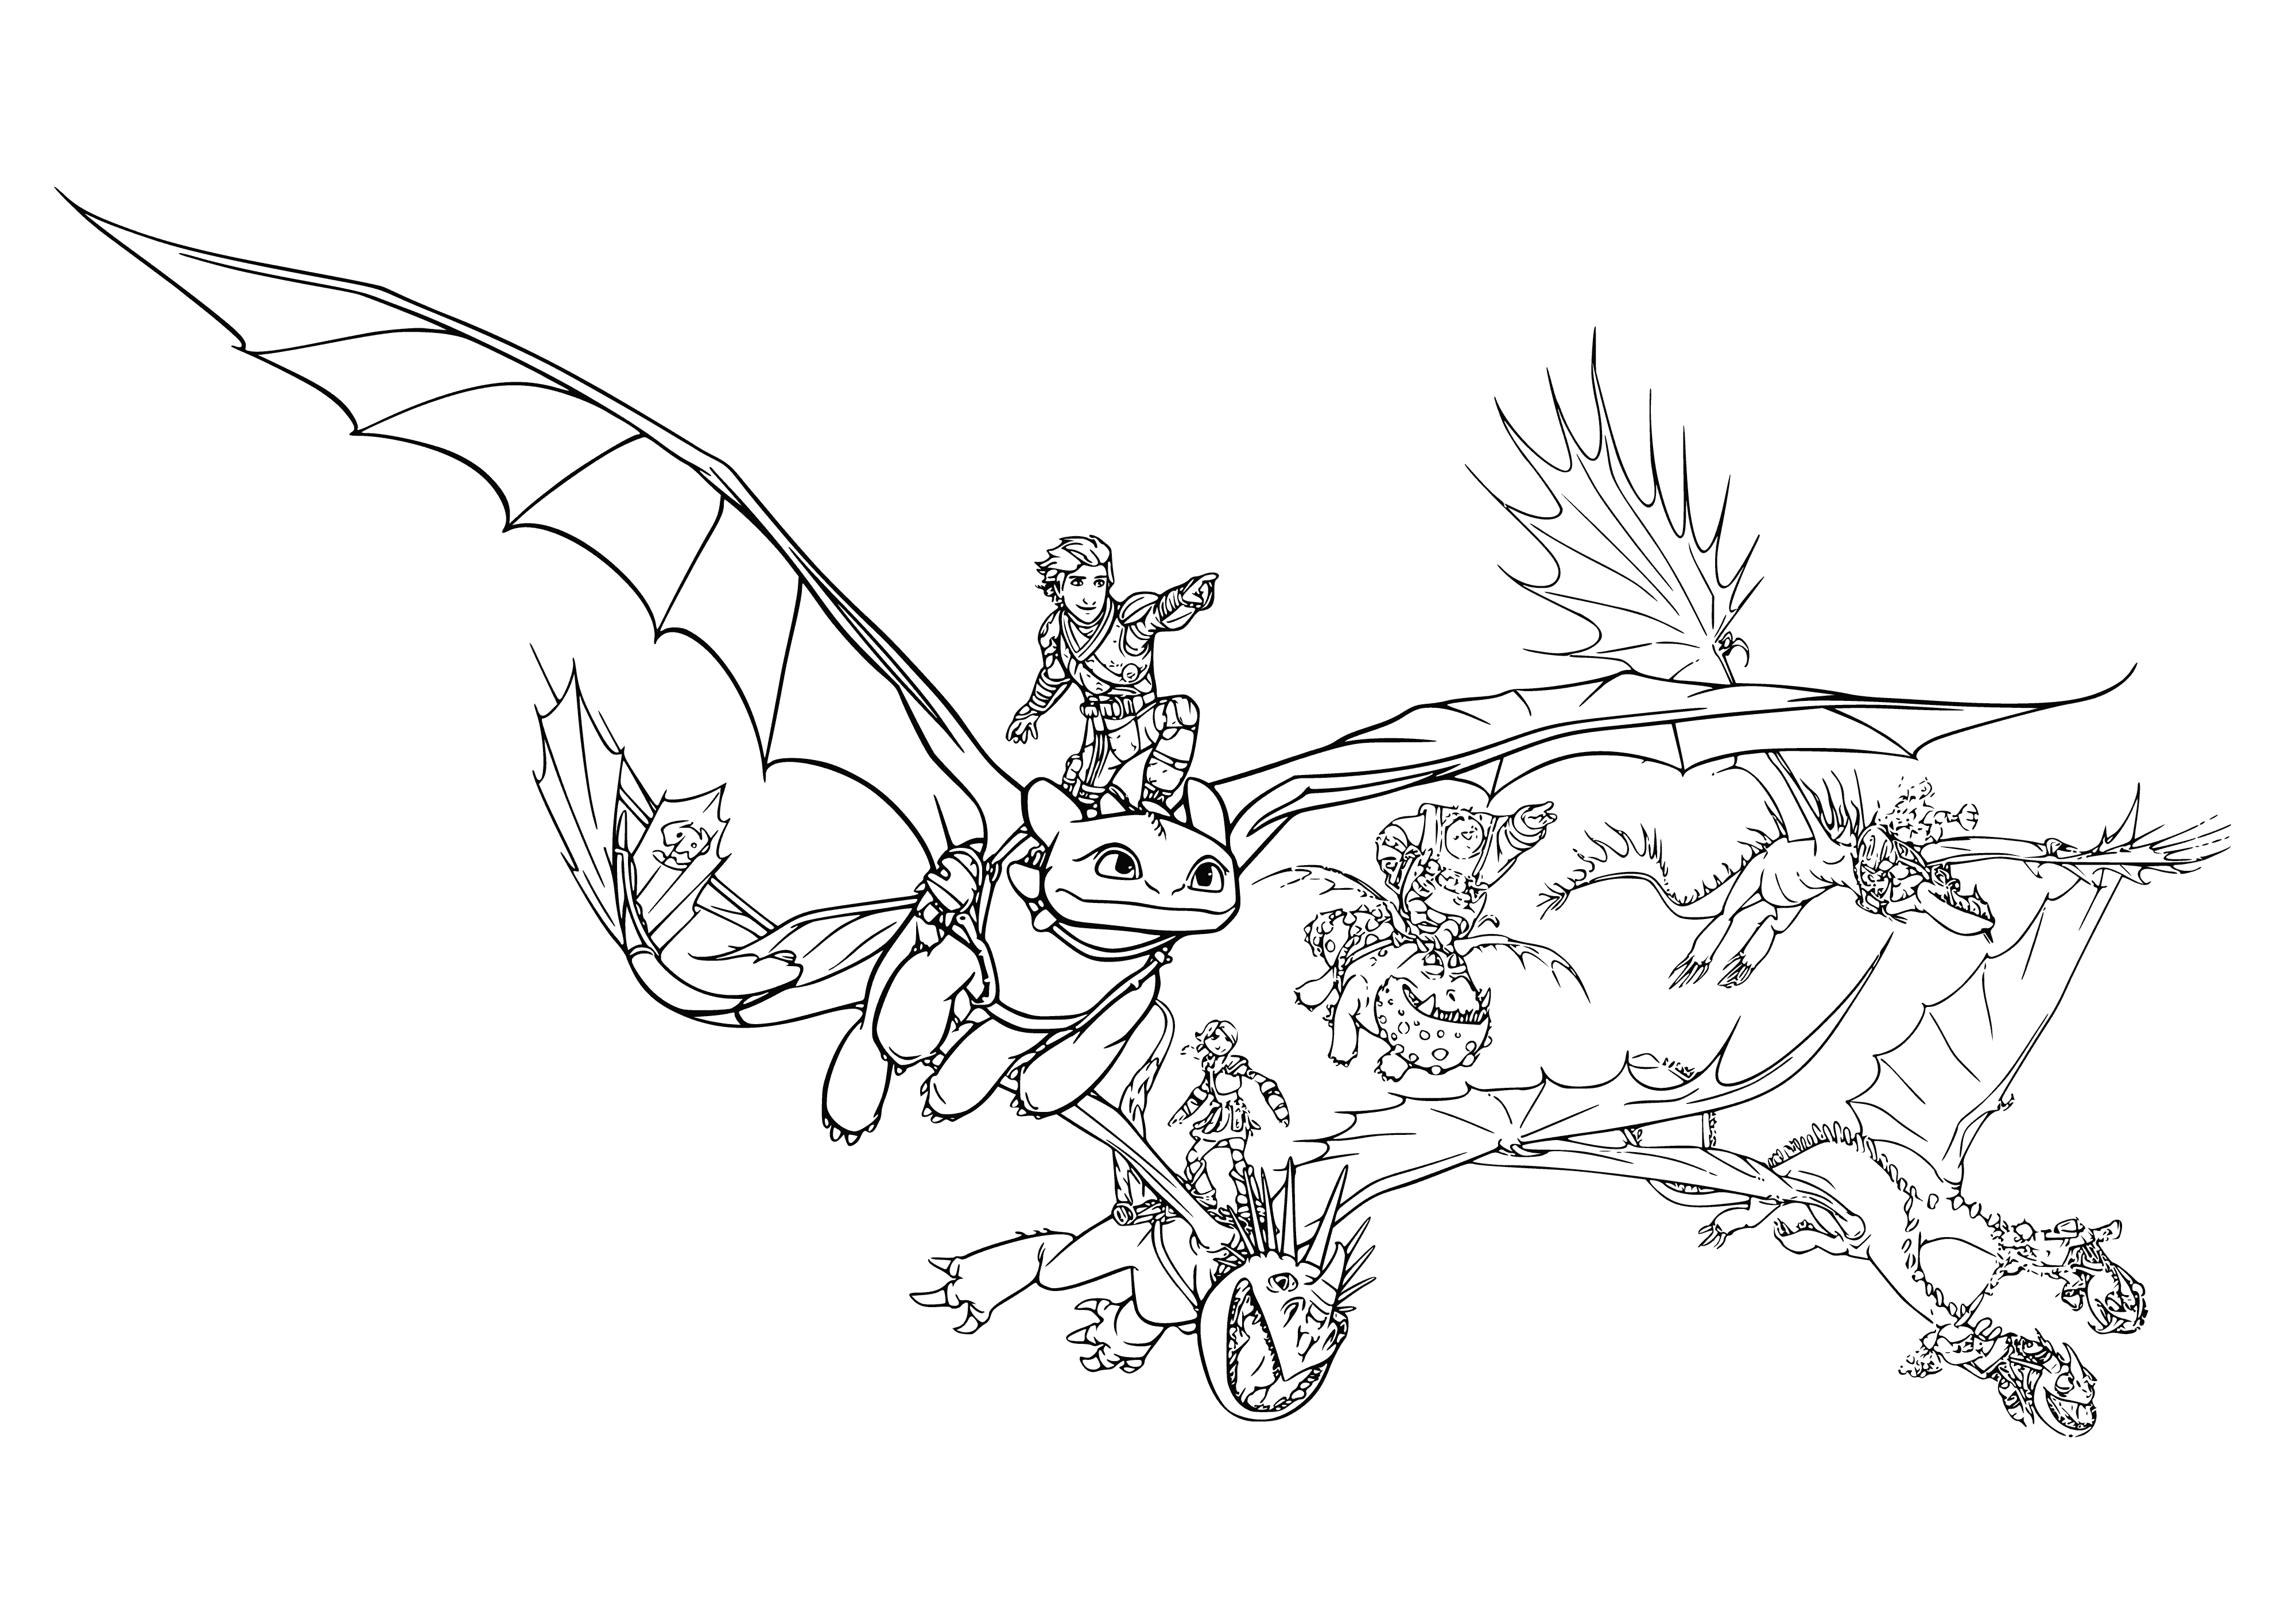 coloring page: Dragon riders teach their dragons w/ name calling, commands & body language.